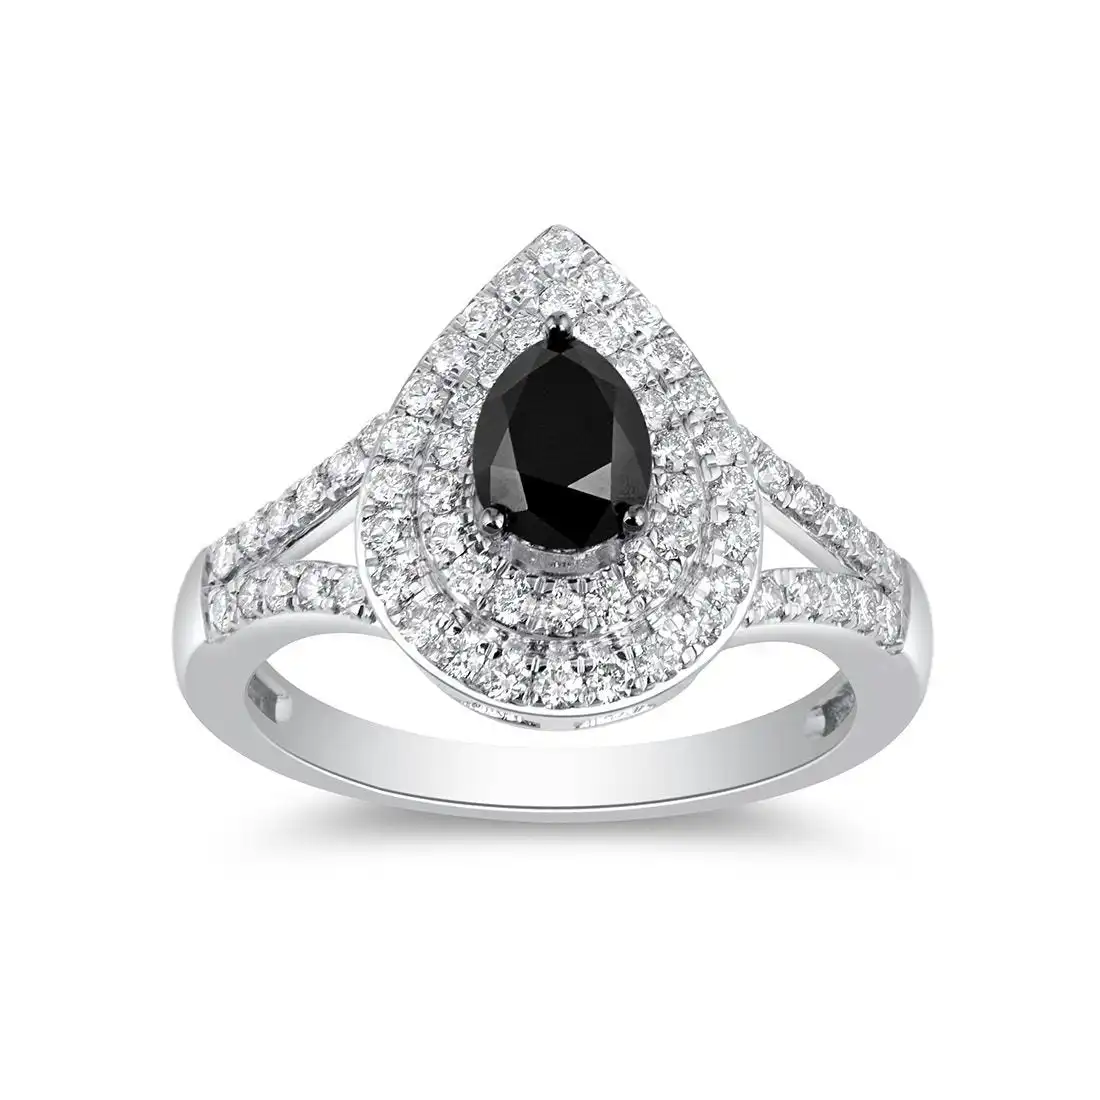 Facets of Love Pear Halo Ring with 1.35ct of Diamonds and 0.75ct Solitaire Black Diamond in 18ct White Gold